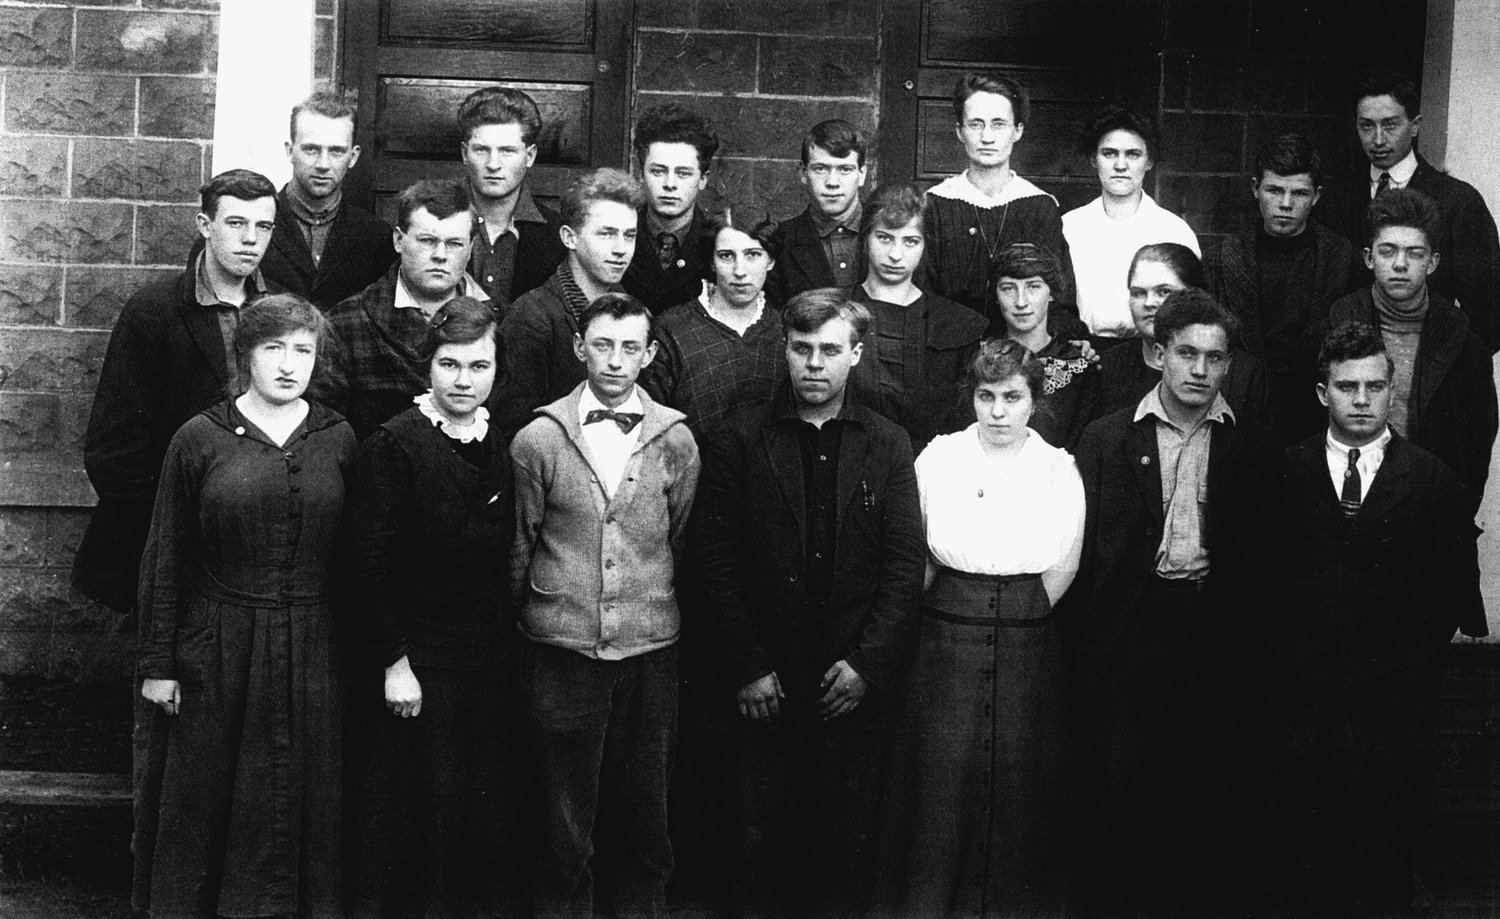 Members of the 1917 graduating class of Mossyrock High School includes a photo of the contributor’s mother, Mattie Moon (third from right, in second row), and his uncle, Forrest Moon (third from left, in front row). Also in the photo is Harry Truman (second from left in top row), who lost his life after refusing to leave his home at the Spirit Lake resort he owned on Mount St. Helens. Even in high school, Harry looks a bit stubborn and destined to make a lasting mark. He died as a result of the volcano’s eruption in May of 1980 and his decision to remain on the mountain he loved. This photo and information was originally submitted by Wally Hill for The Chronicle's Our Hometowns books.